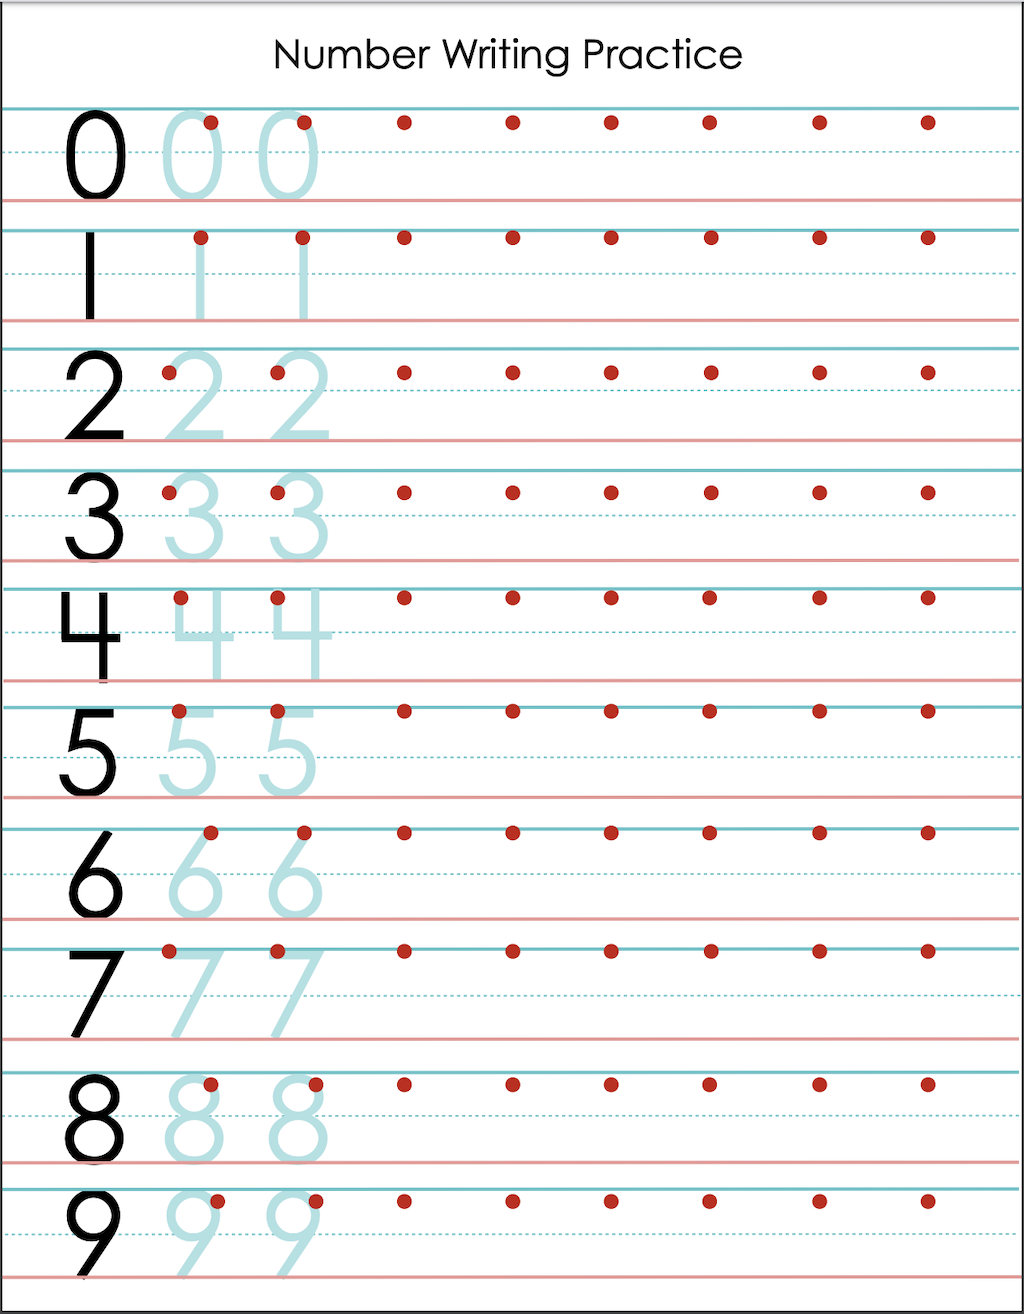 Number Writing Practice Sheet (Free Printable) - Flanders Family Homelife